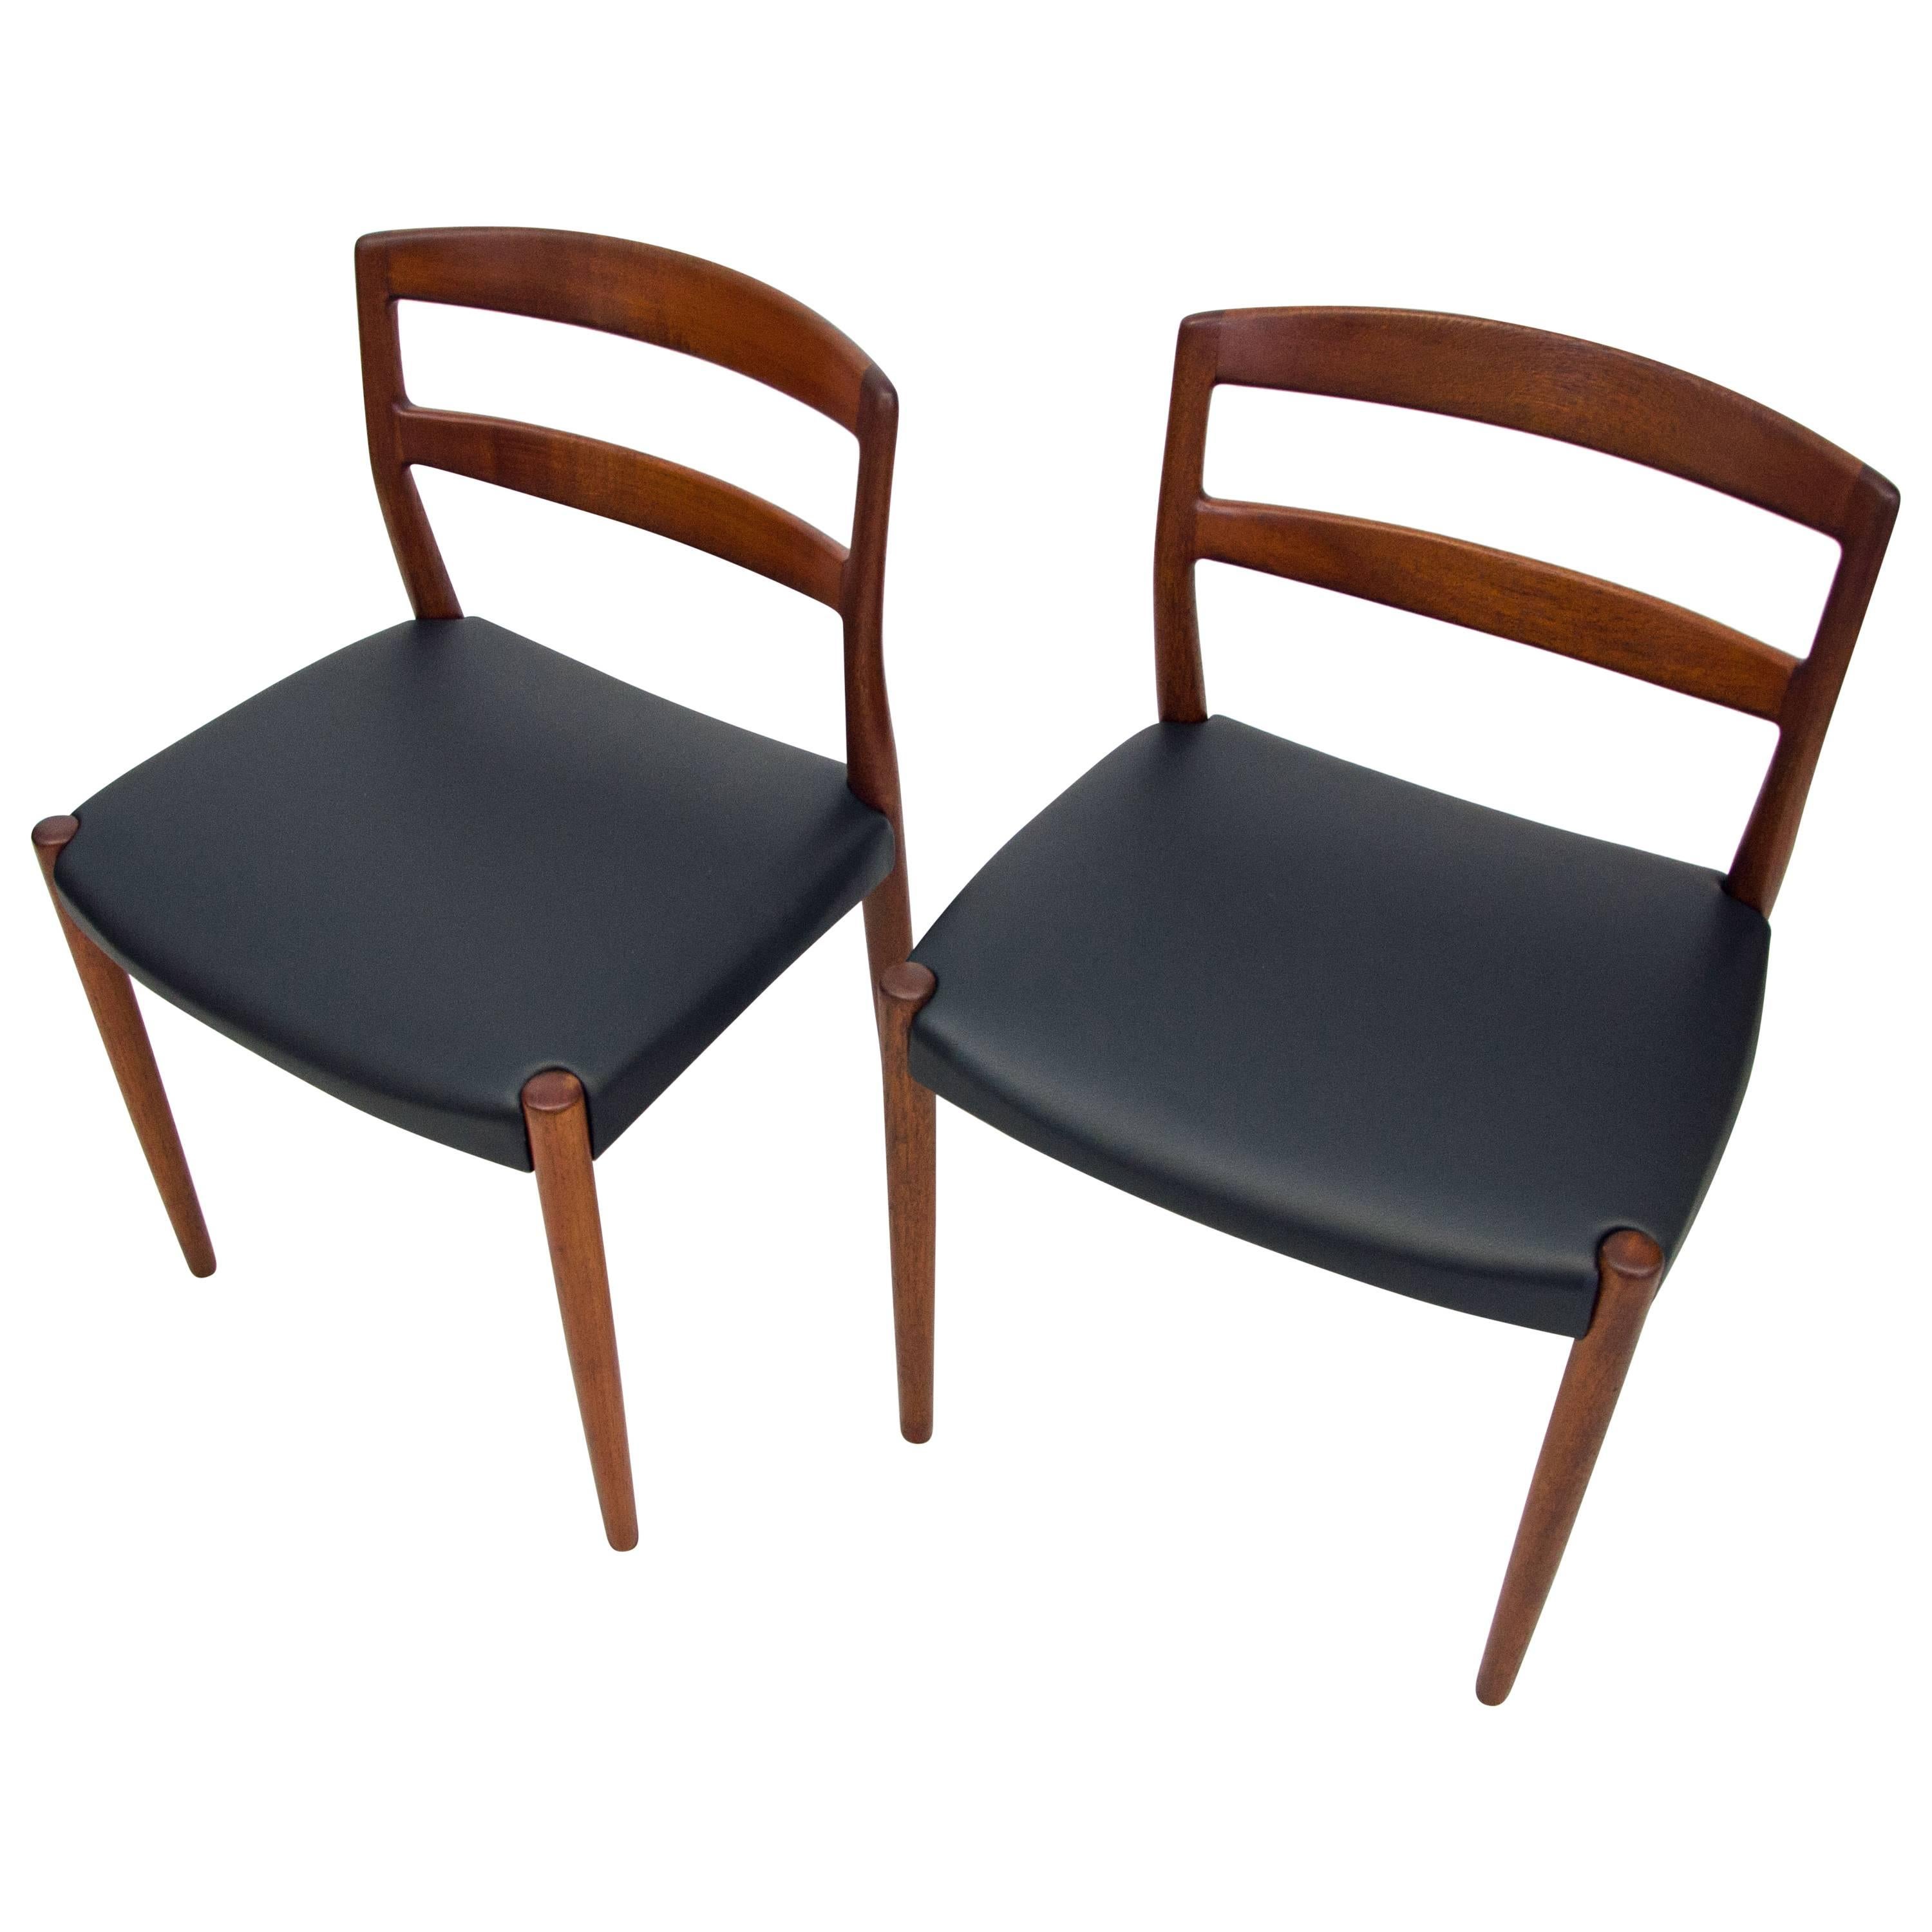 Pair of Danish Teak Dining or Accent Chairs, Willy Beck